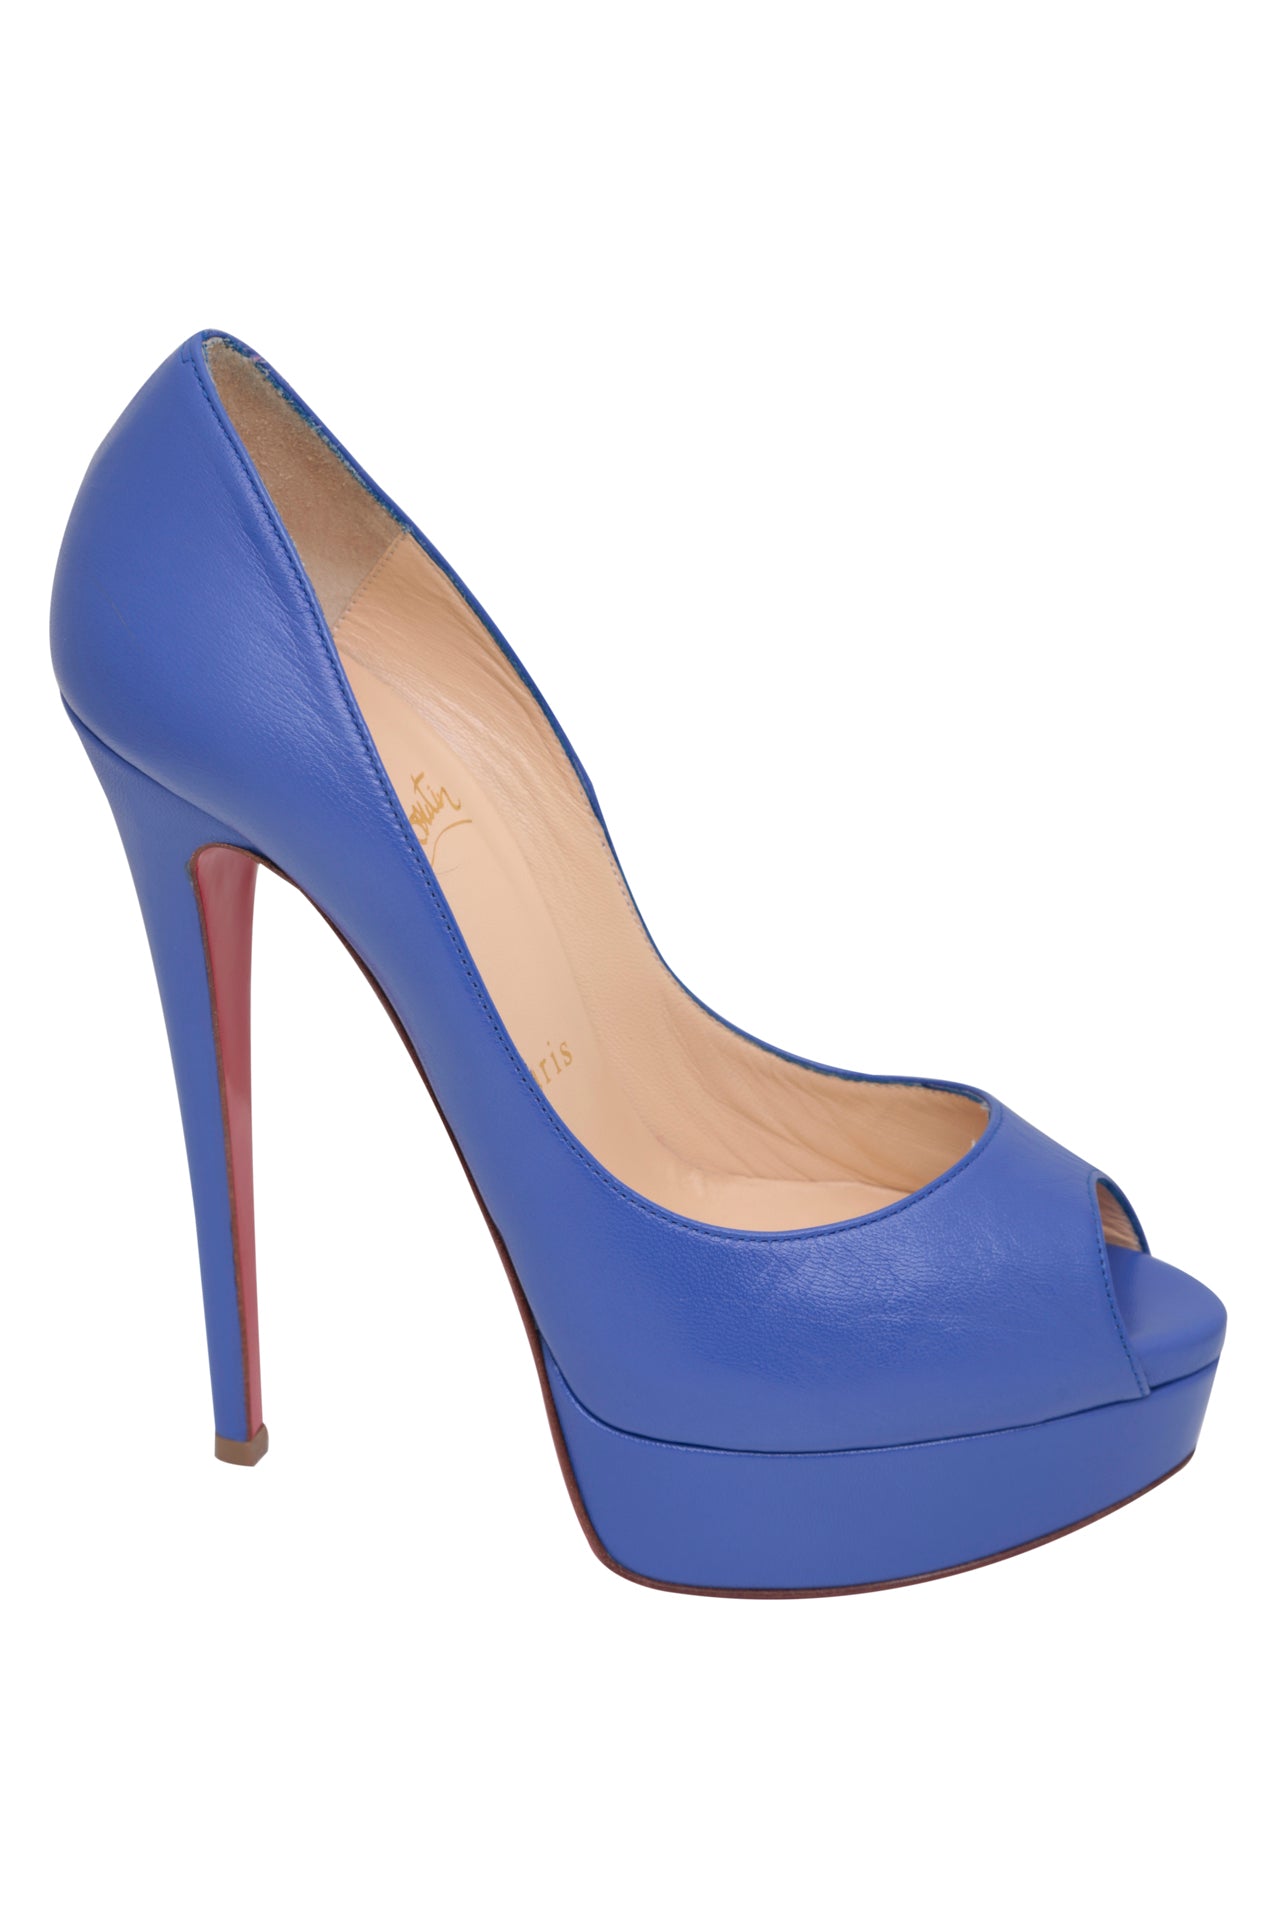 Christian Louboutin Hot Spring Lace and Patent Leather Pumps EU 37